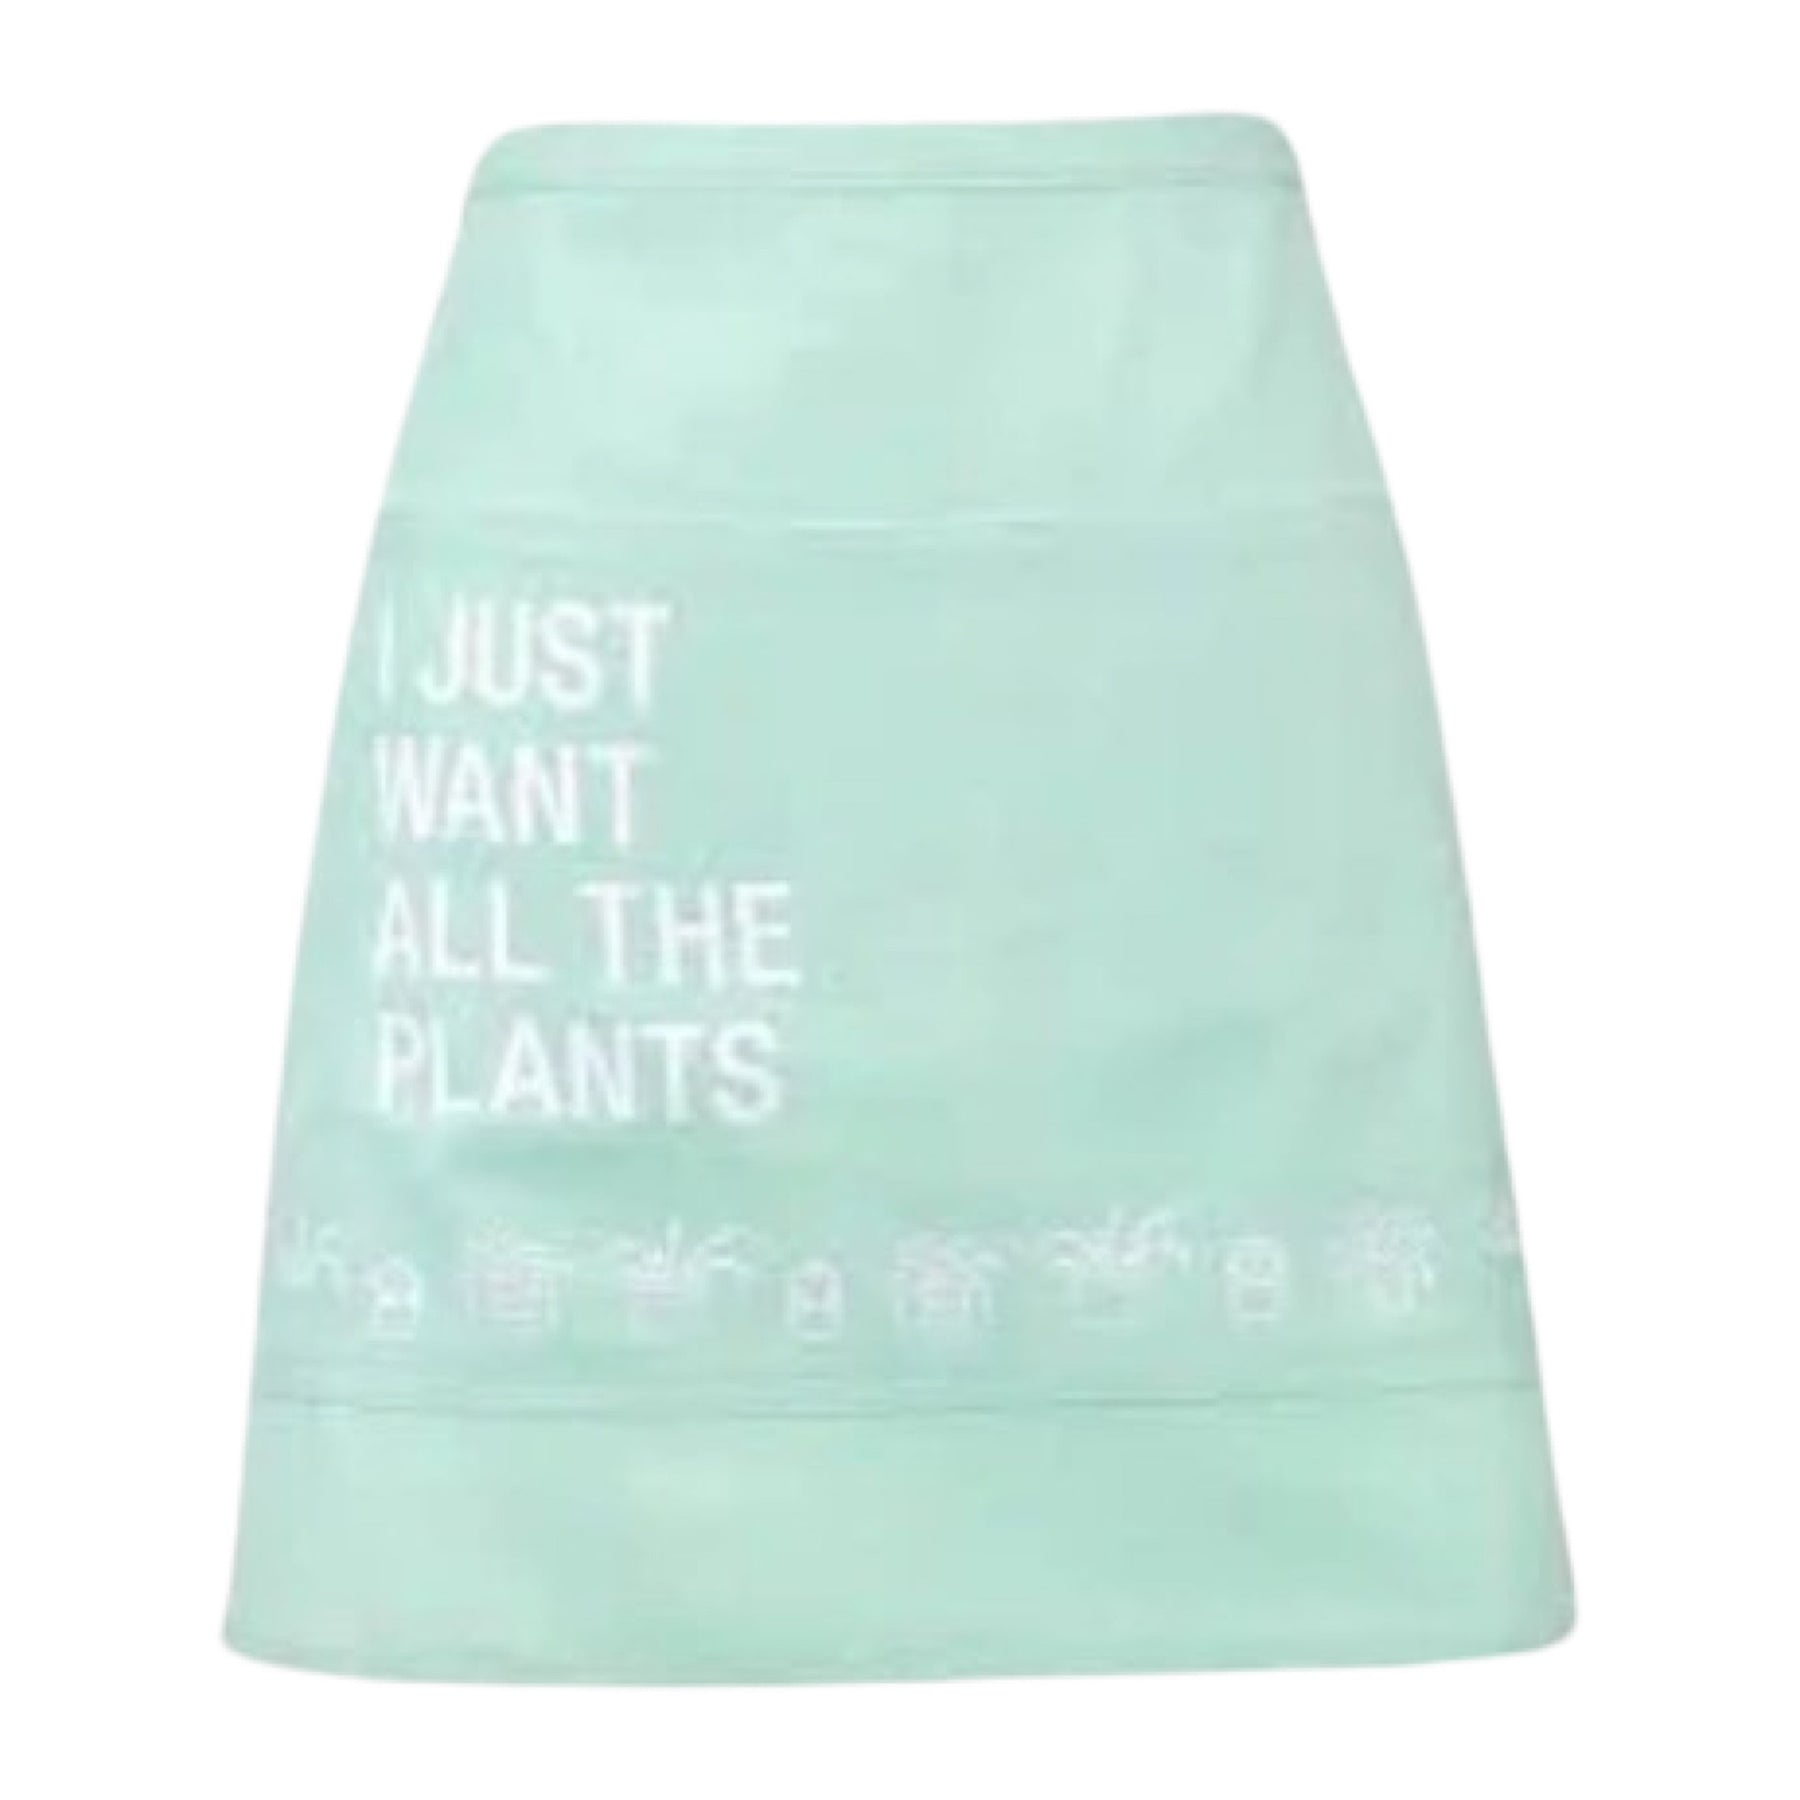 4 Pocket "I Just Want All The Plants" Apron For Gardening - 100% Cotton